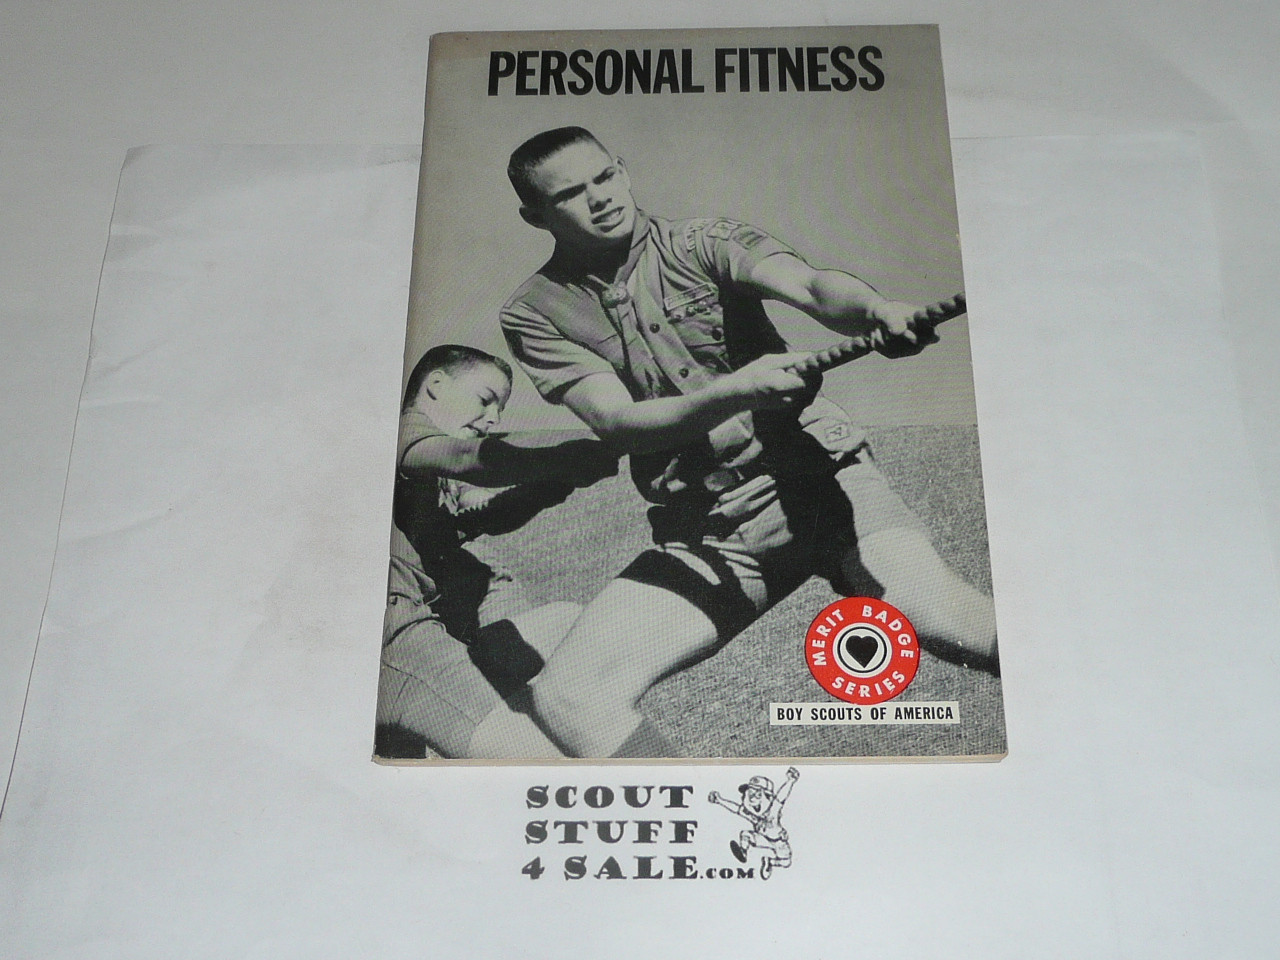 Personal Fitness Merit Badge Pamphlet, Type 7, Full Picture, 5-67 Printing